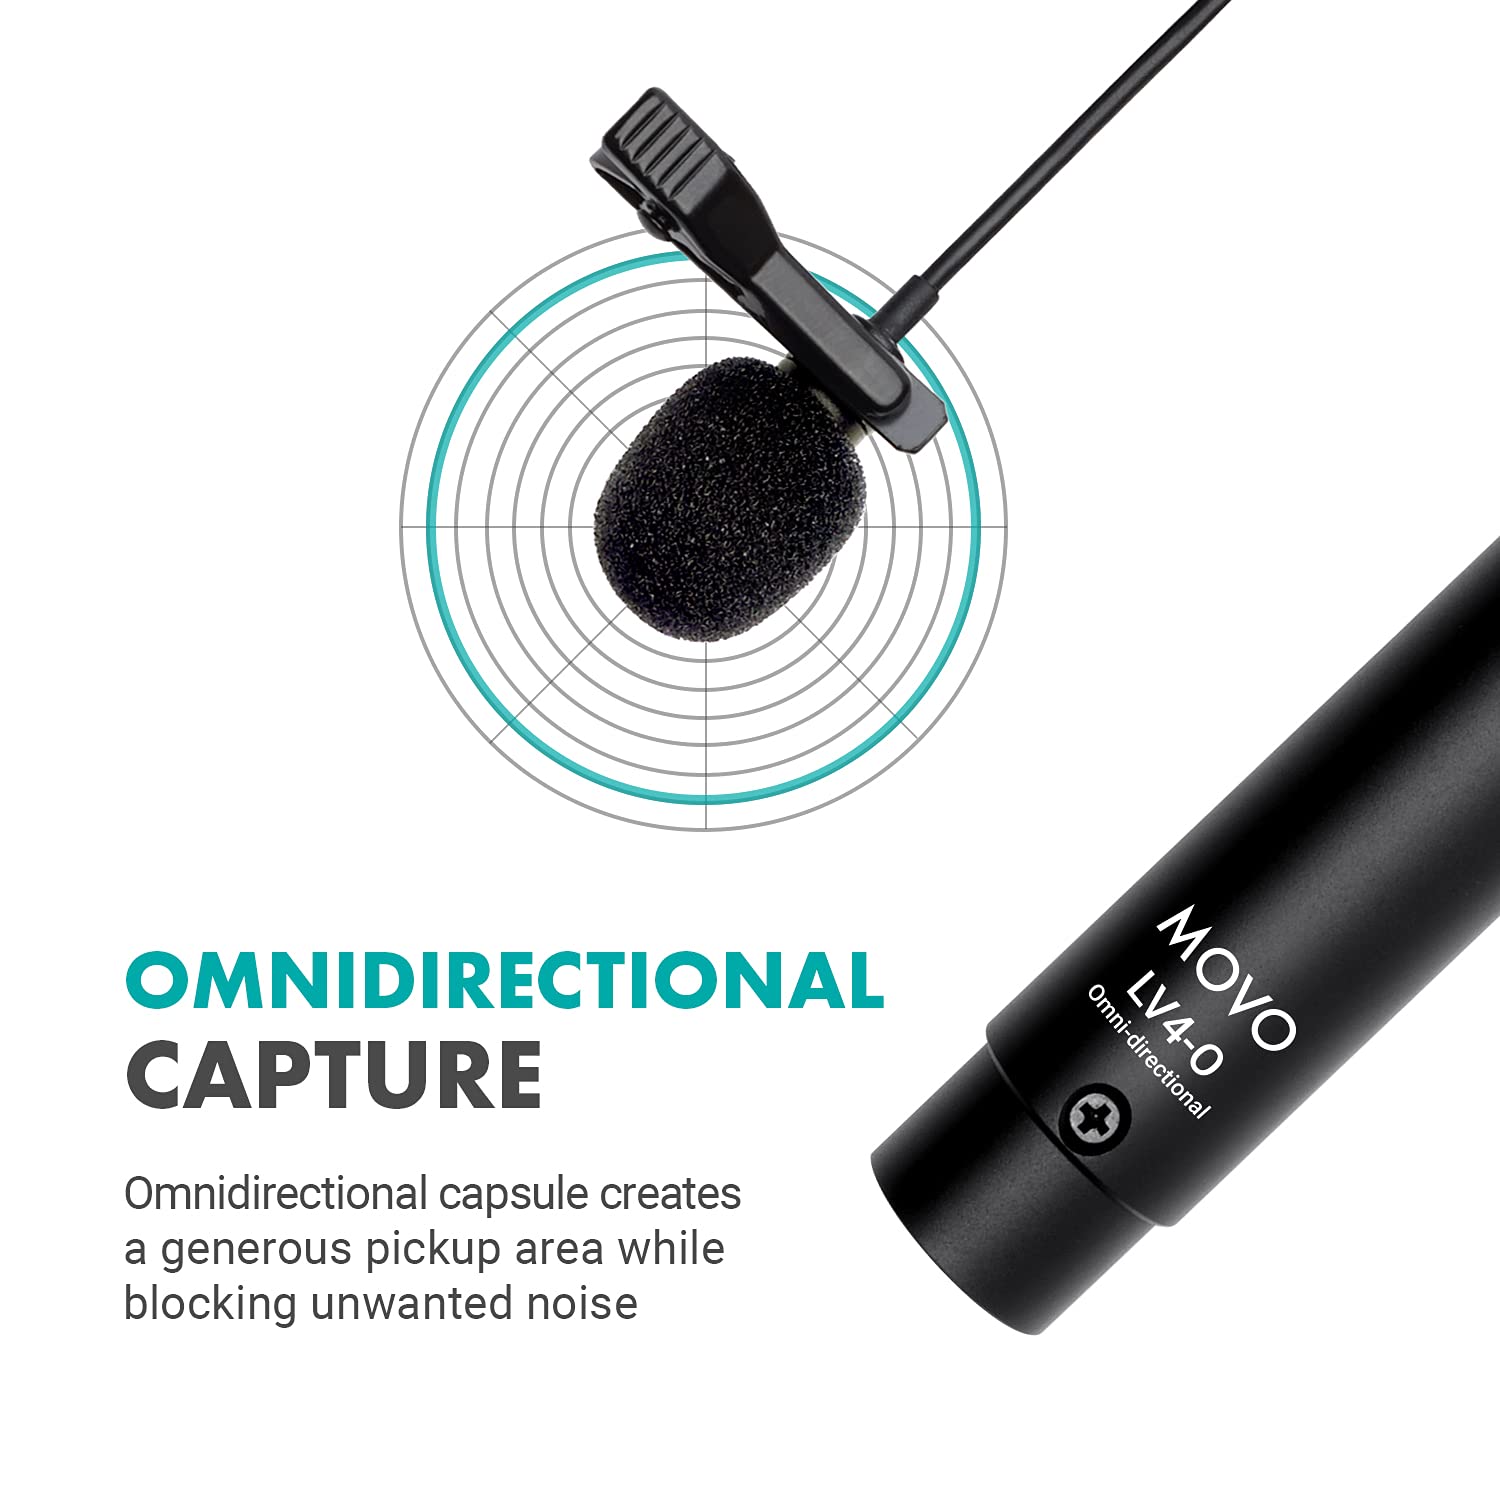 Movo LV4-O2 XLR Phantom Power Omnidirectional Lavalier Microphone Set, with Lapel Mic Clips and Windscreens - Perfect Lapel Microphone for Video Recording, Podcast, Interview, YouTube Production  - Like New